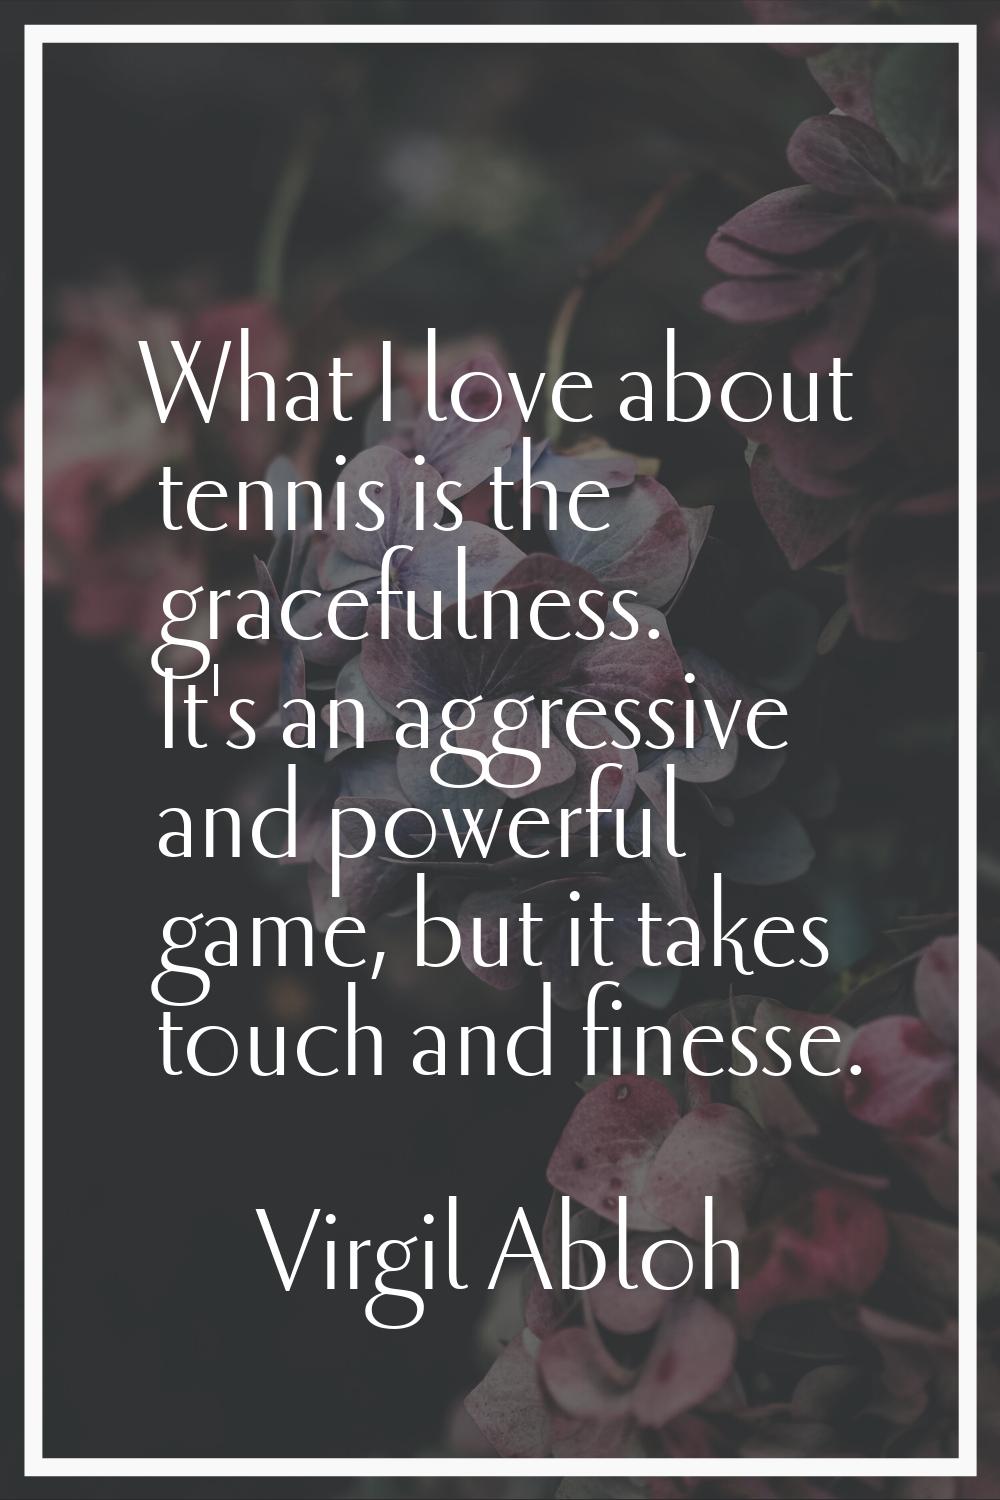 What I love about tennis is the gracefulness. It's an aggressive and powerful game, but it takes to